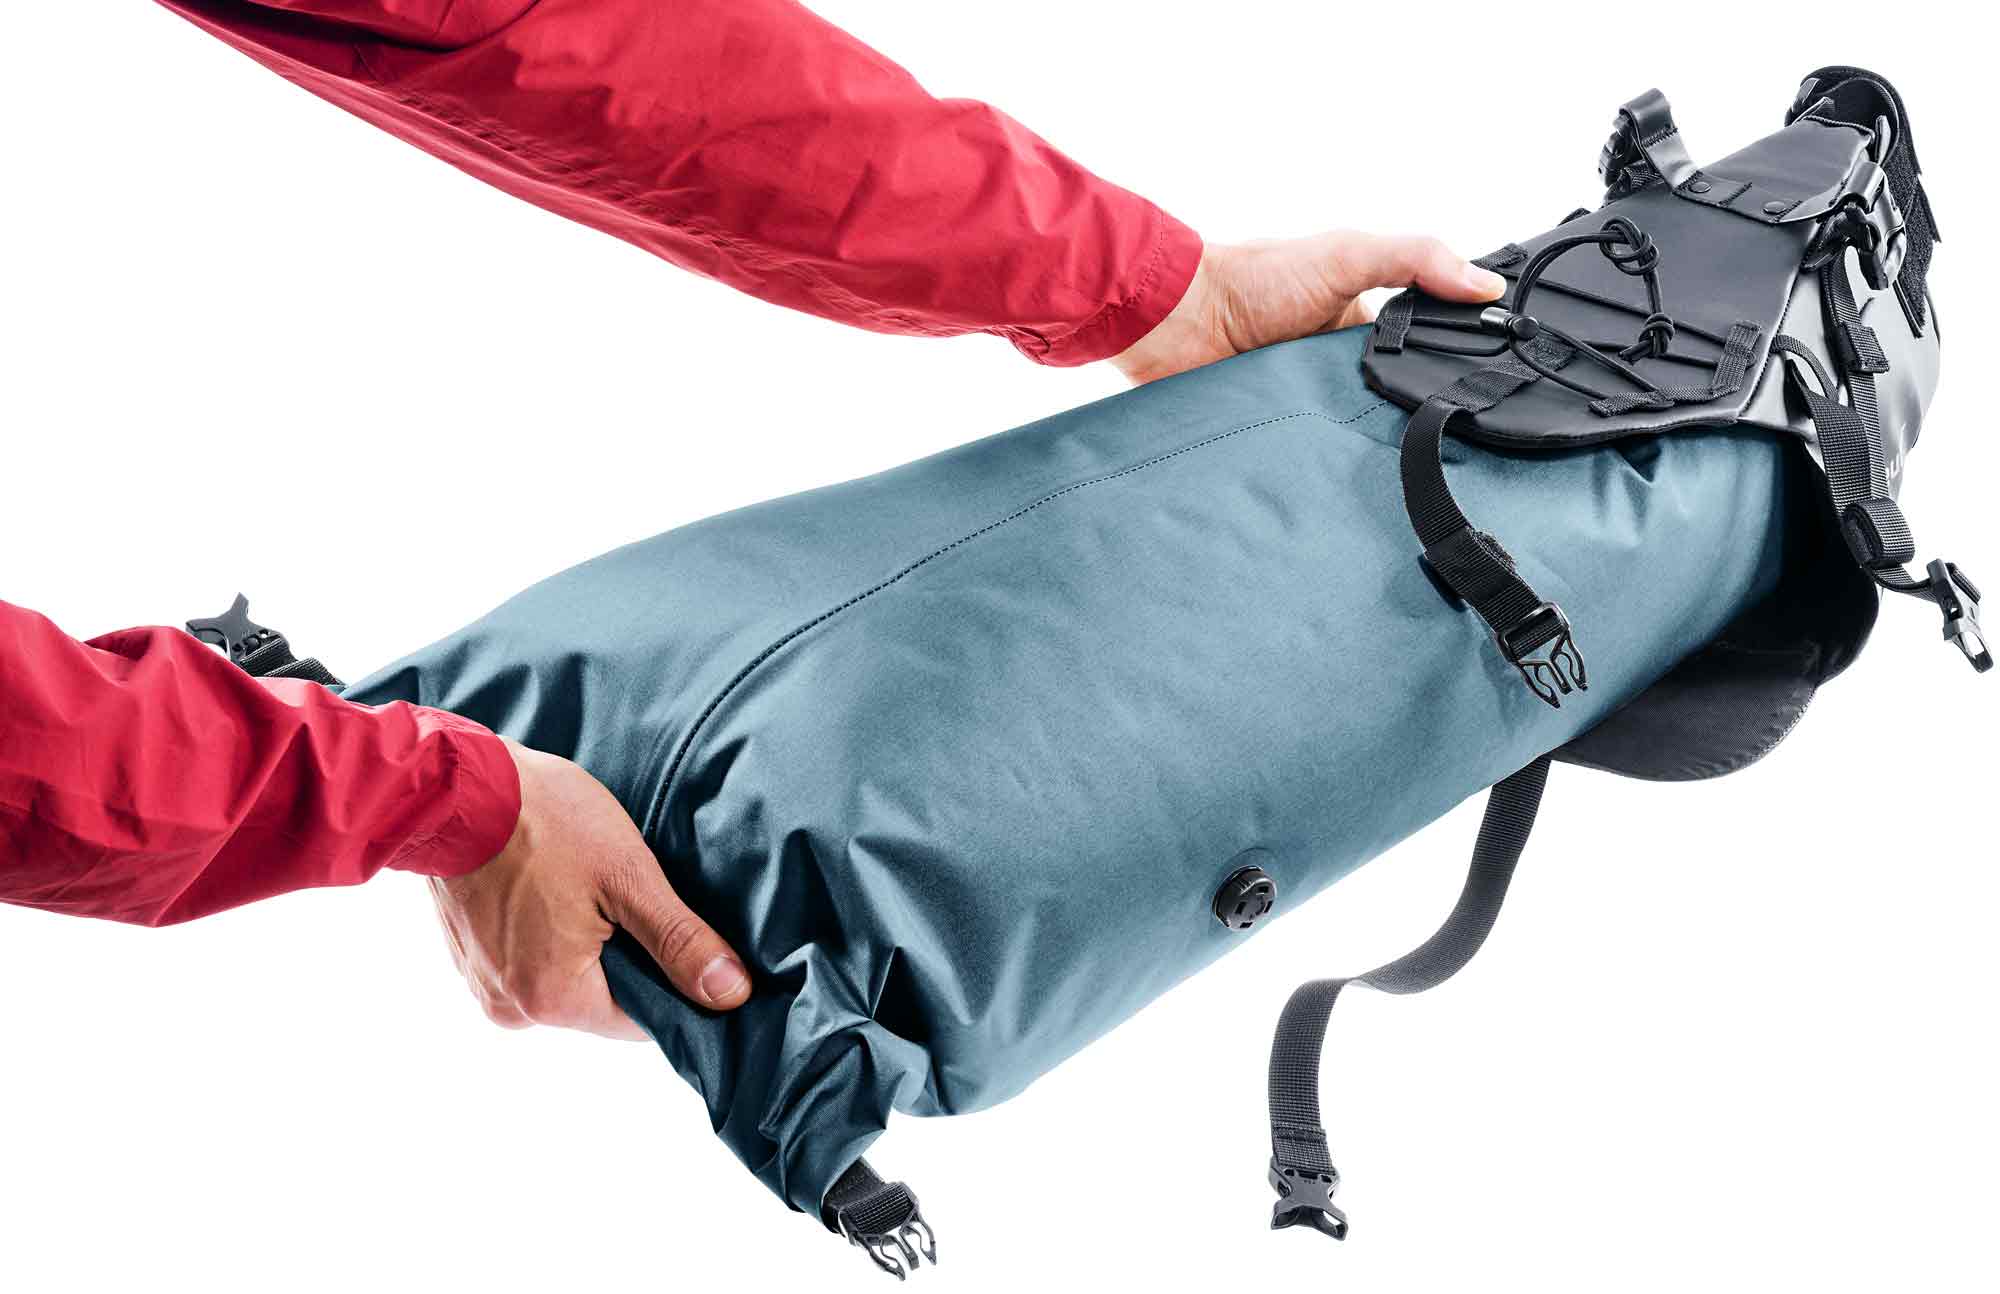 The deuter bikepacking saddle bag also convinces with its two-part design.